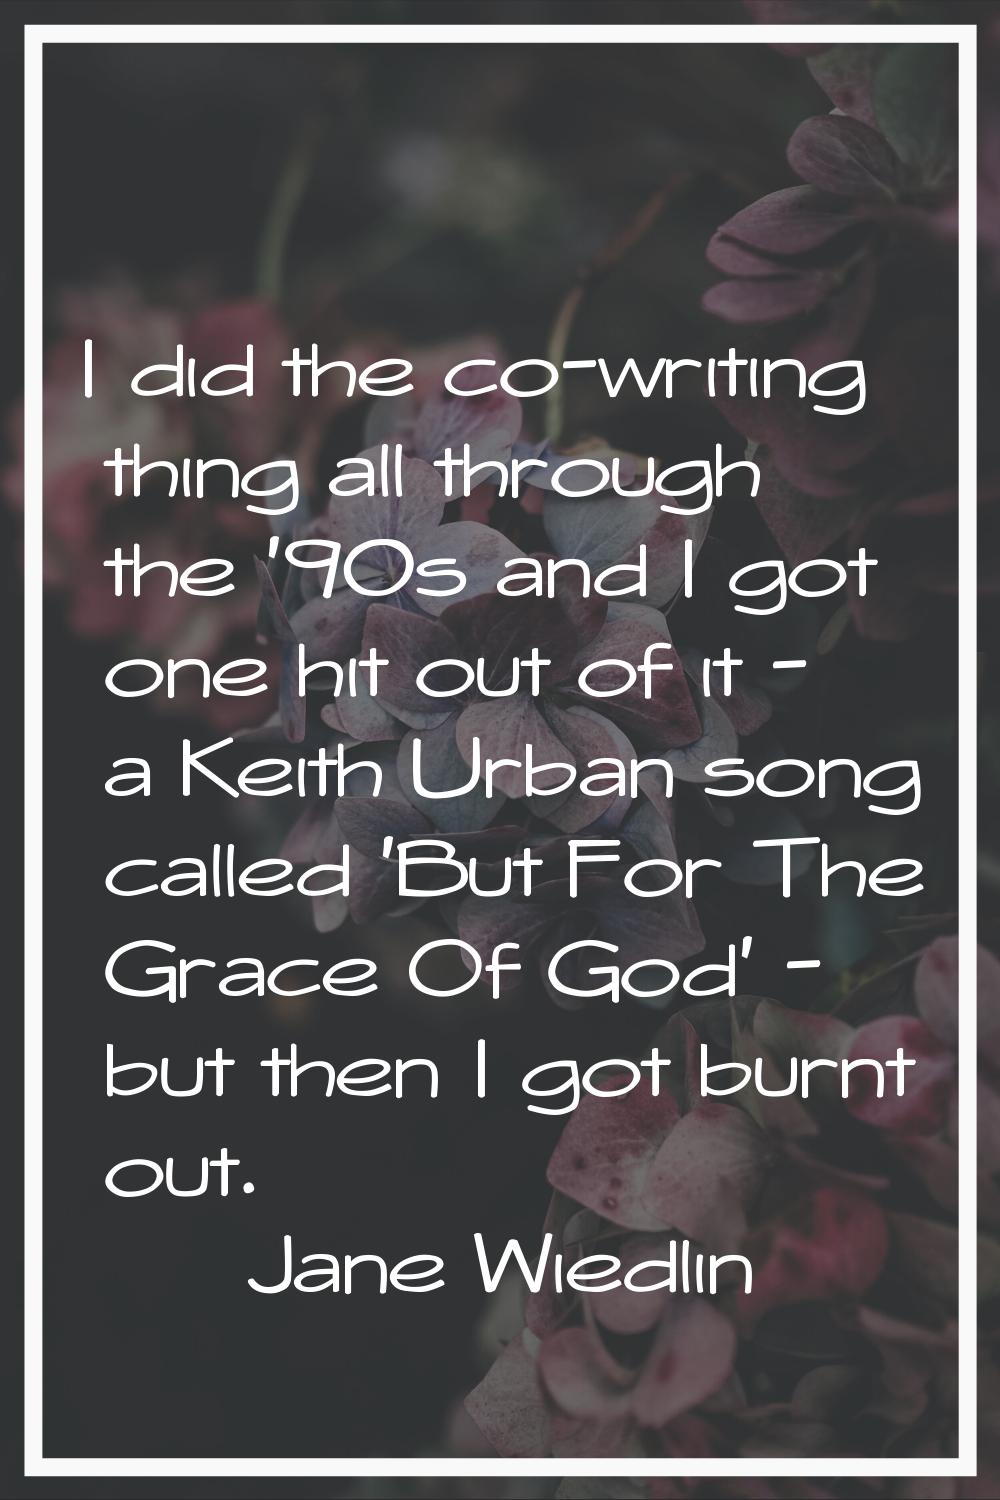 I did the co-writing thing all through the '90s and I got one hit out of it - a Keith Urban song ca